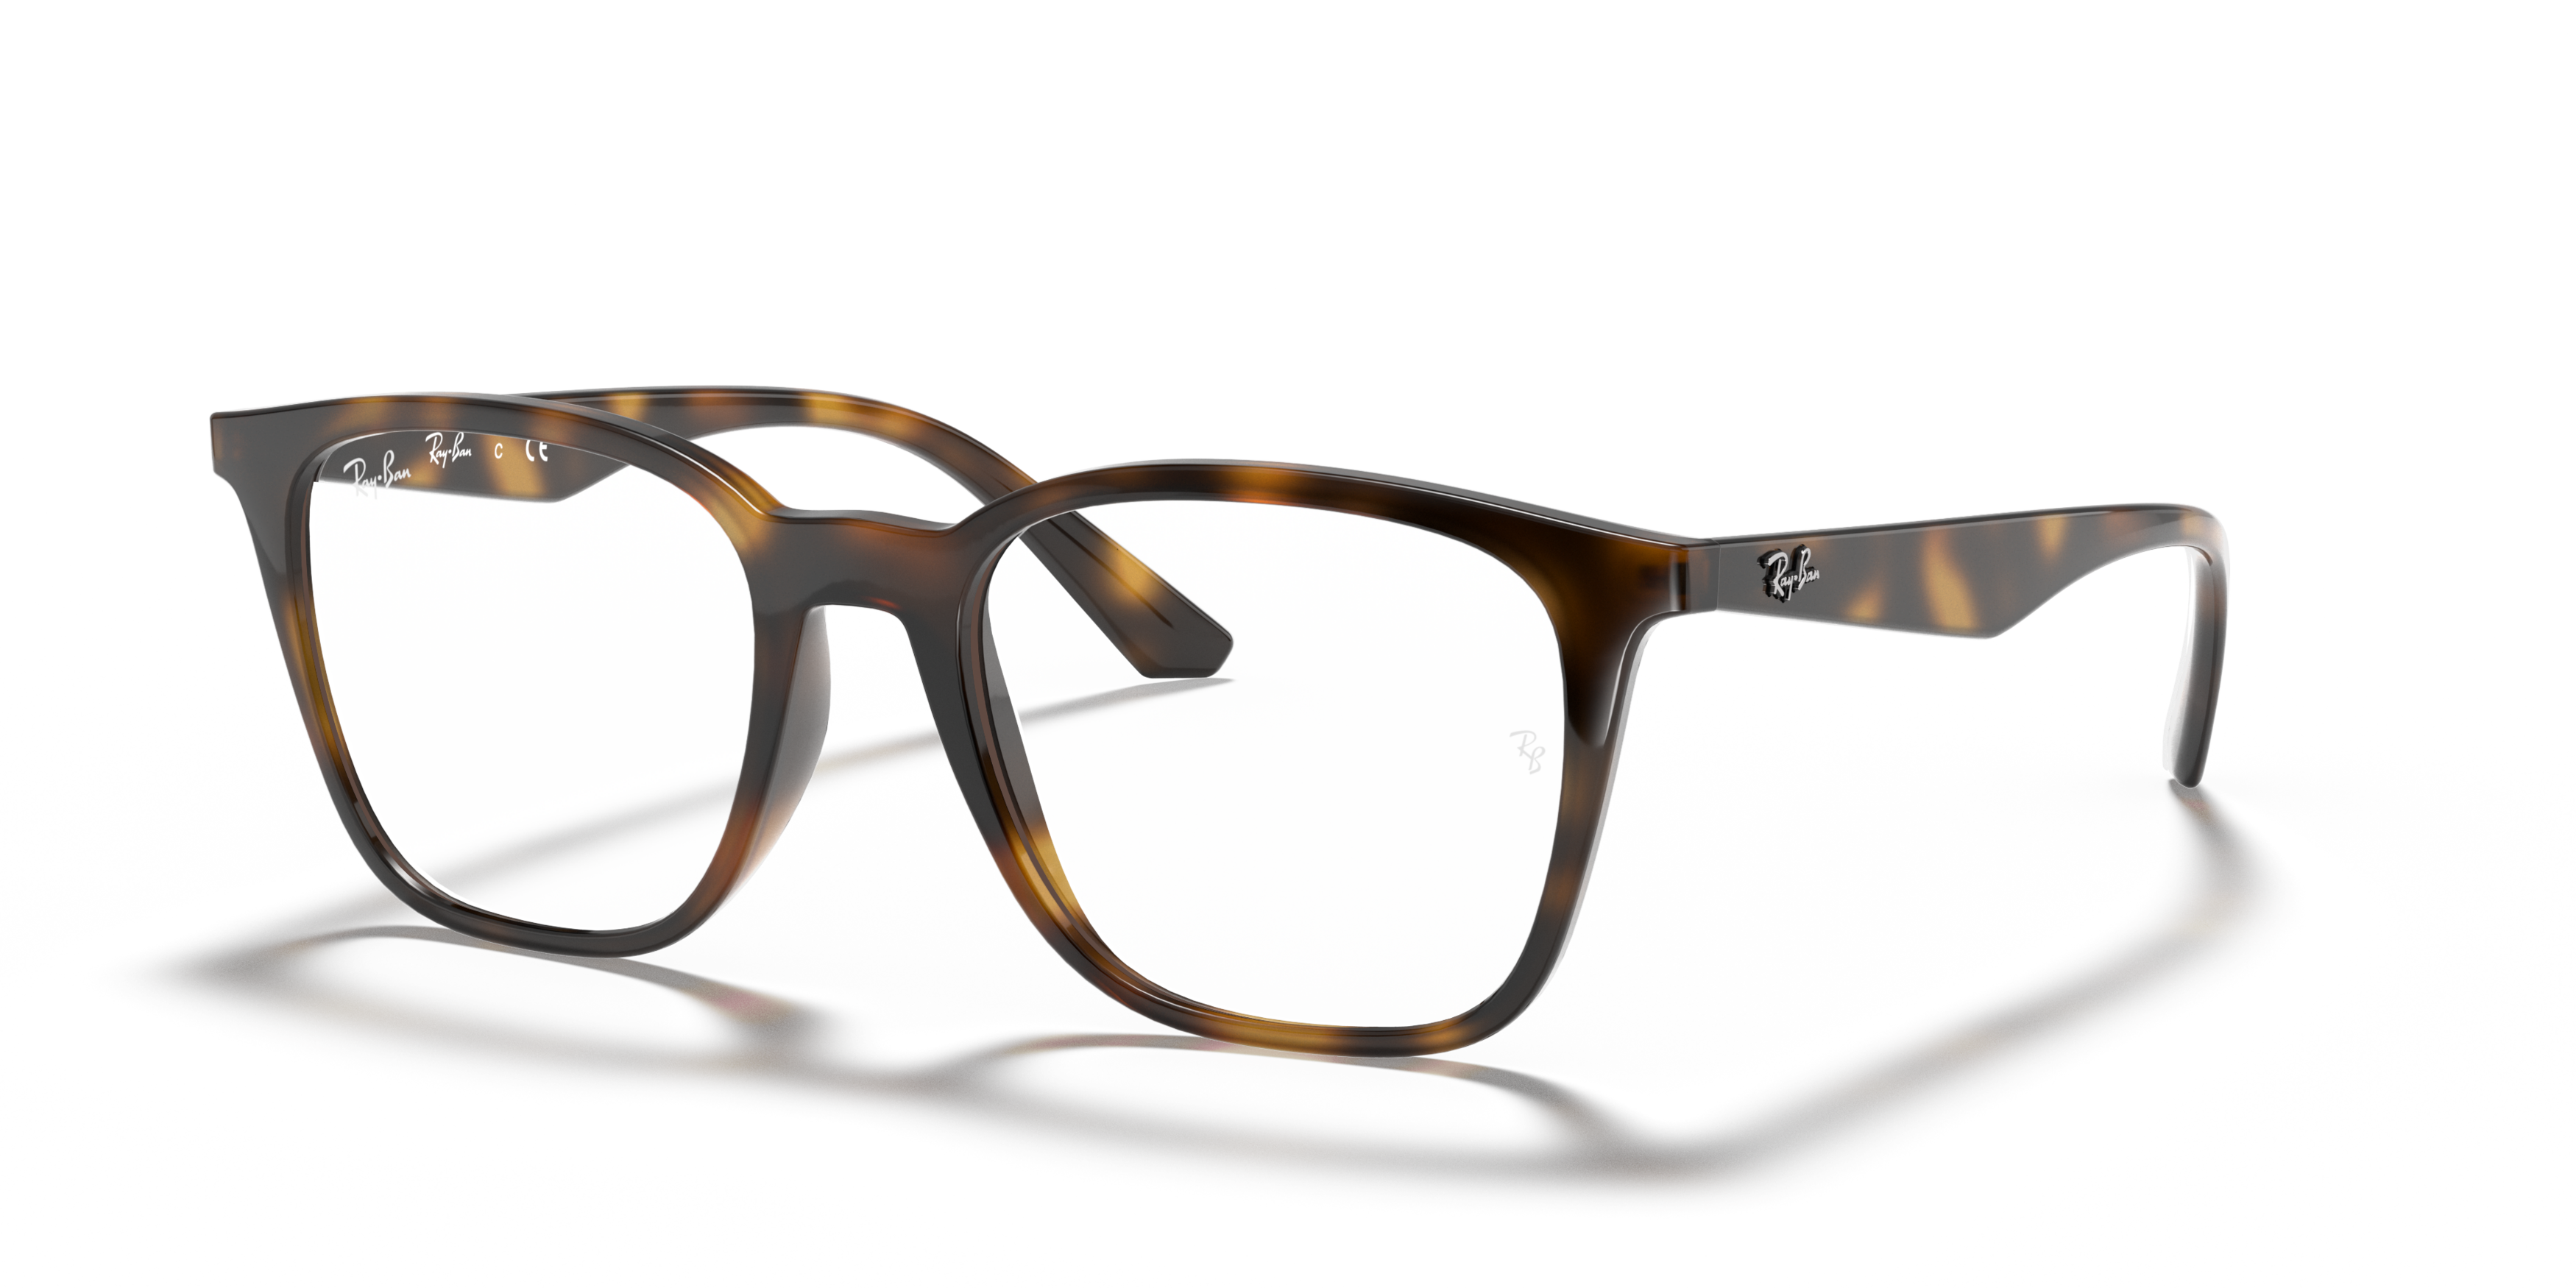 Angle_Left01 Ray-Ban RX 7177 Glasses Transparent / Tortoise Shell